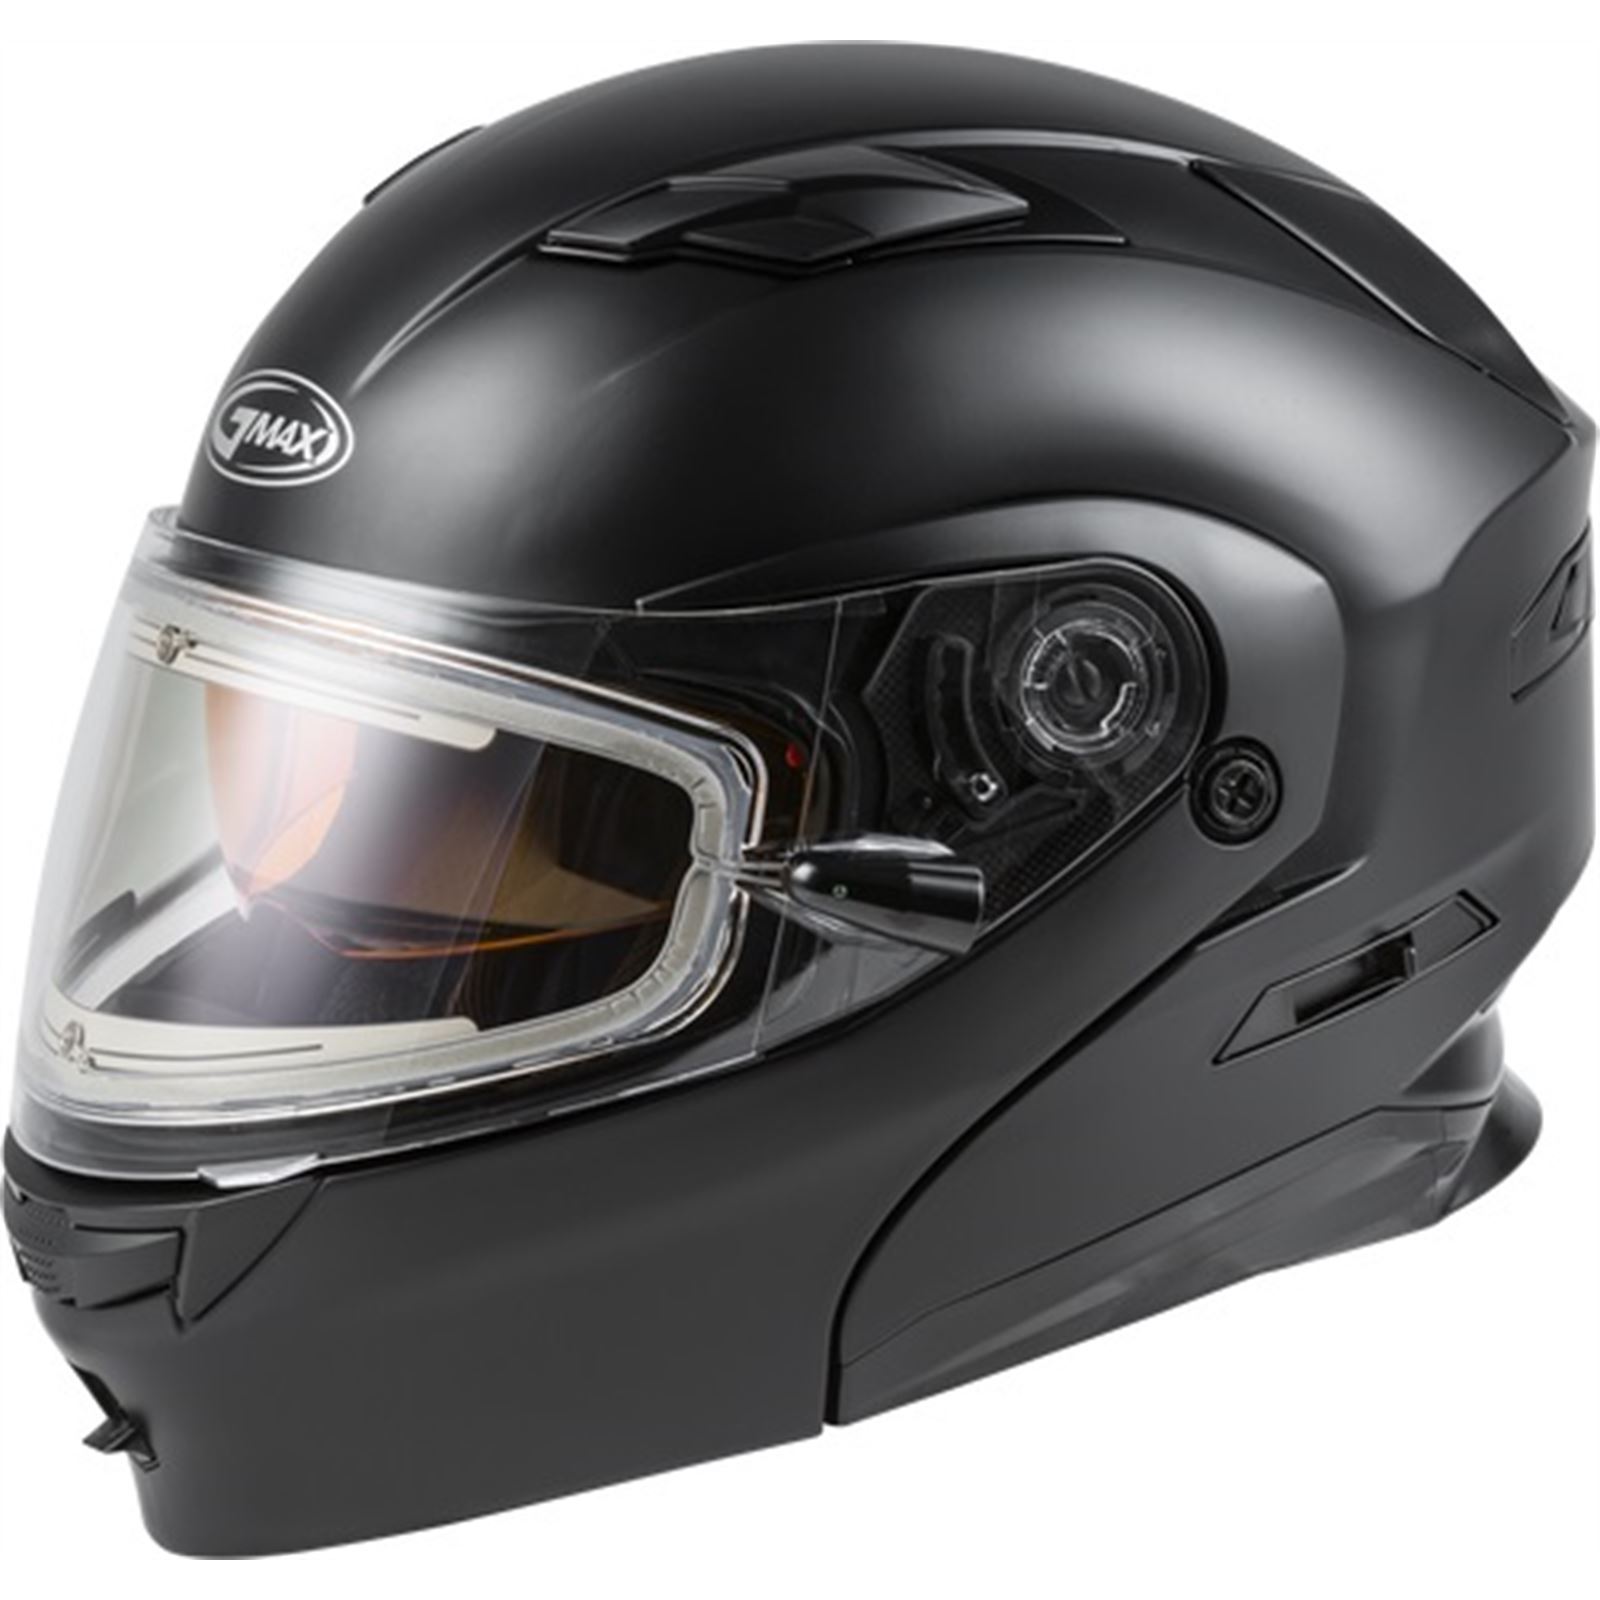 GMax MD-01S Modular Snow Helmet with Electric Shield - Matte Black - Large